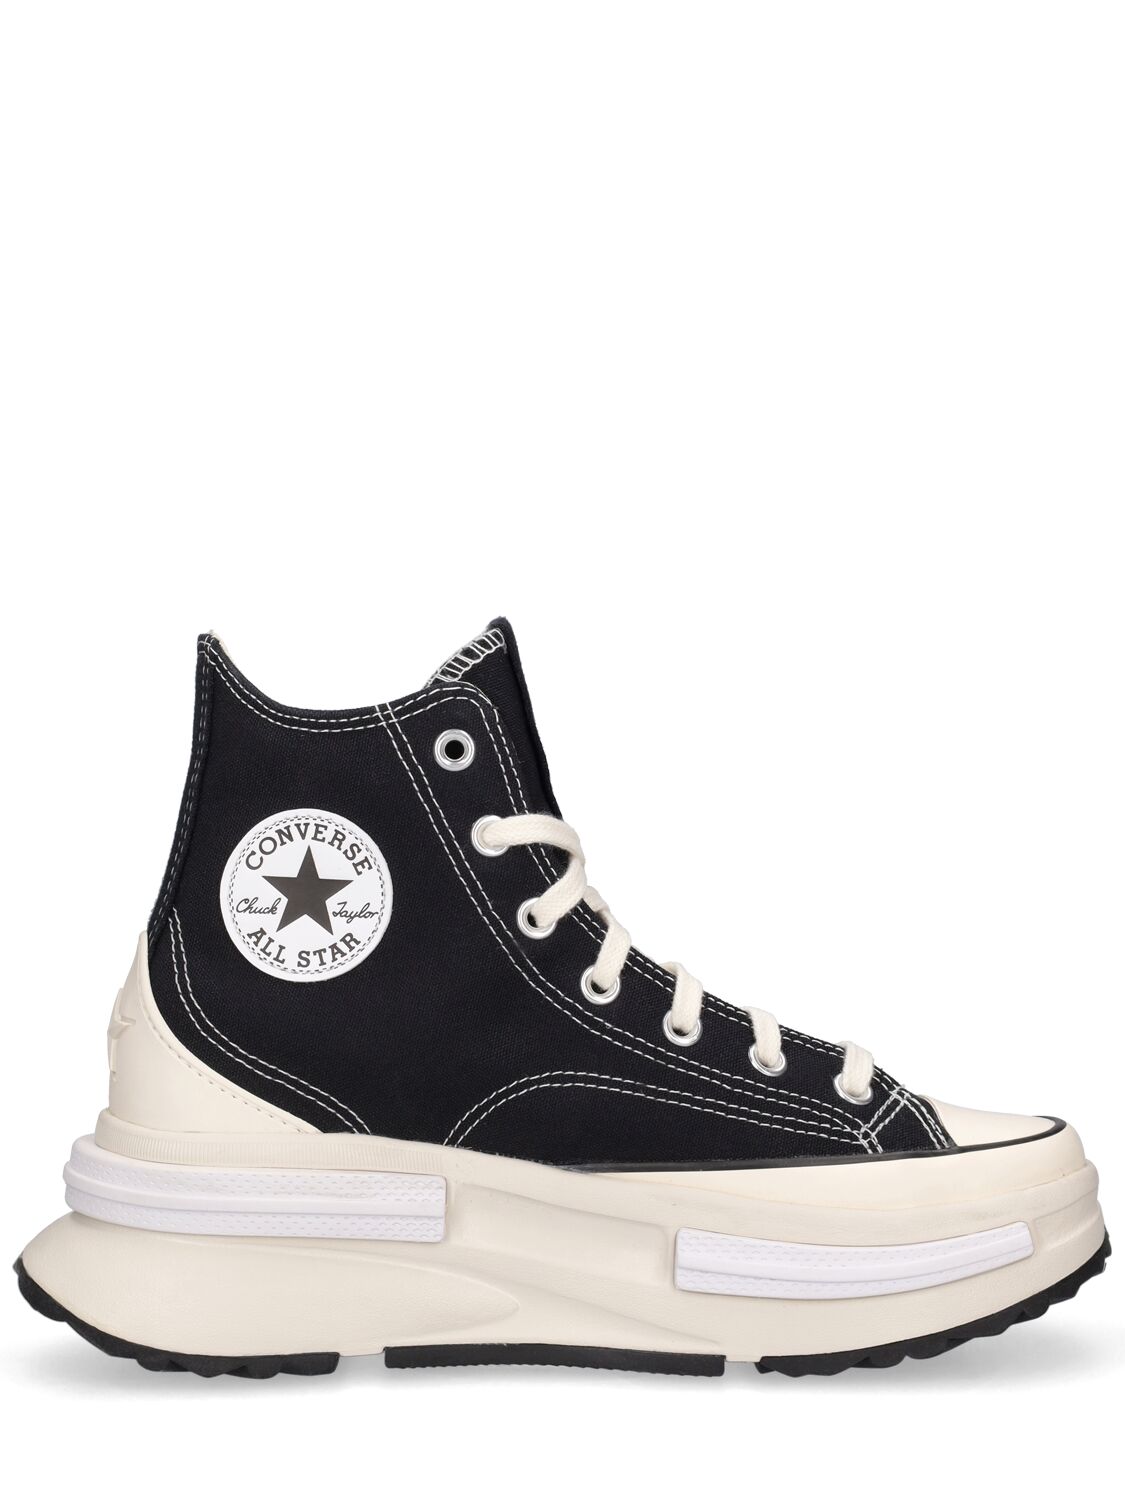 Image of Run Star Legacy Cx Sneakers